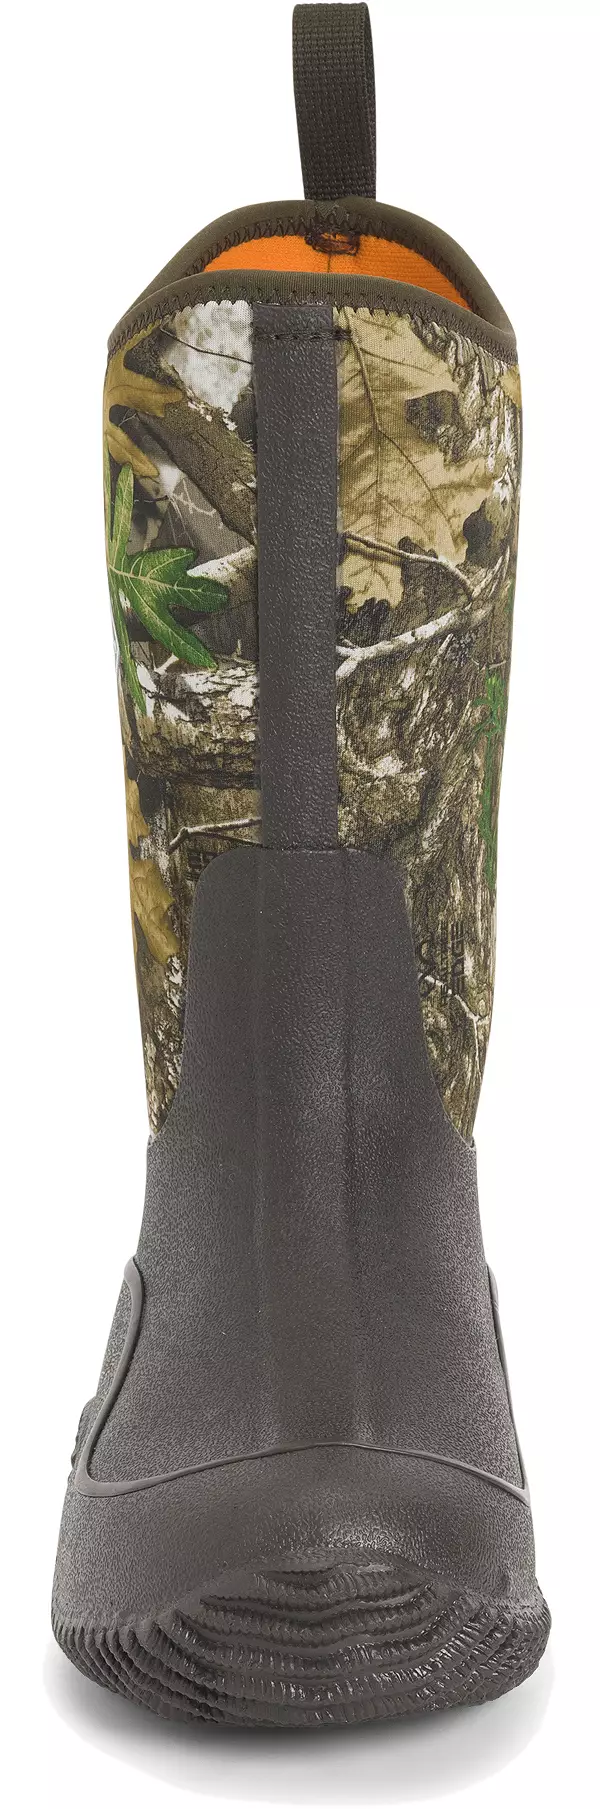 DSG Women's Rubber Hunting Boot 2.0 Insulated - Realtree Edge - My